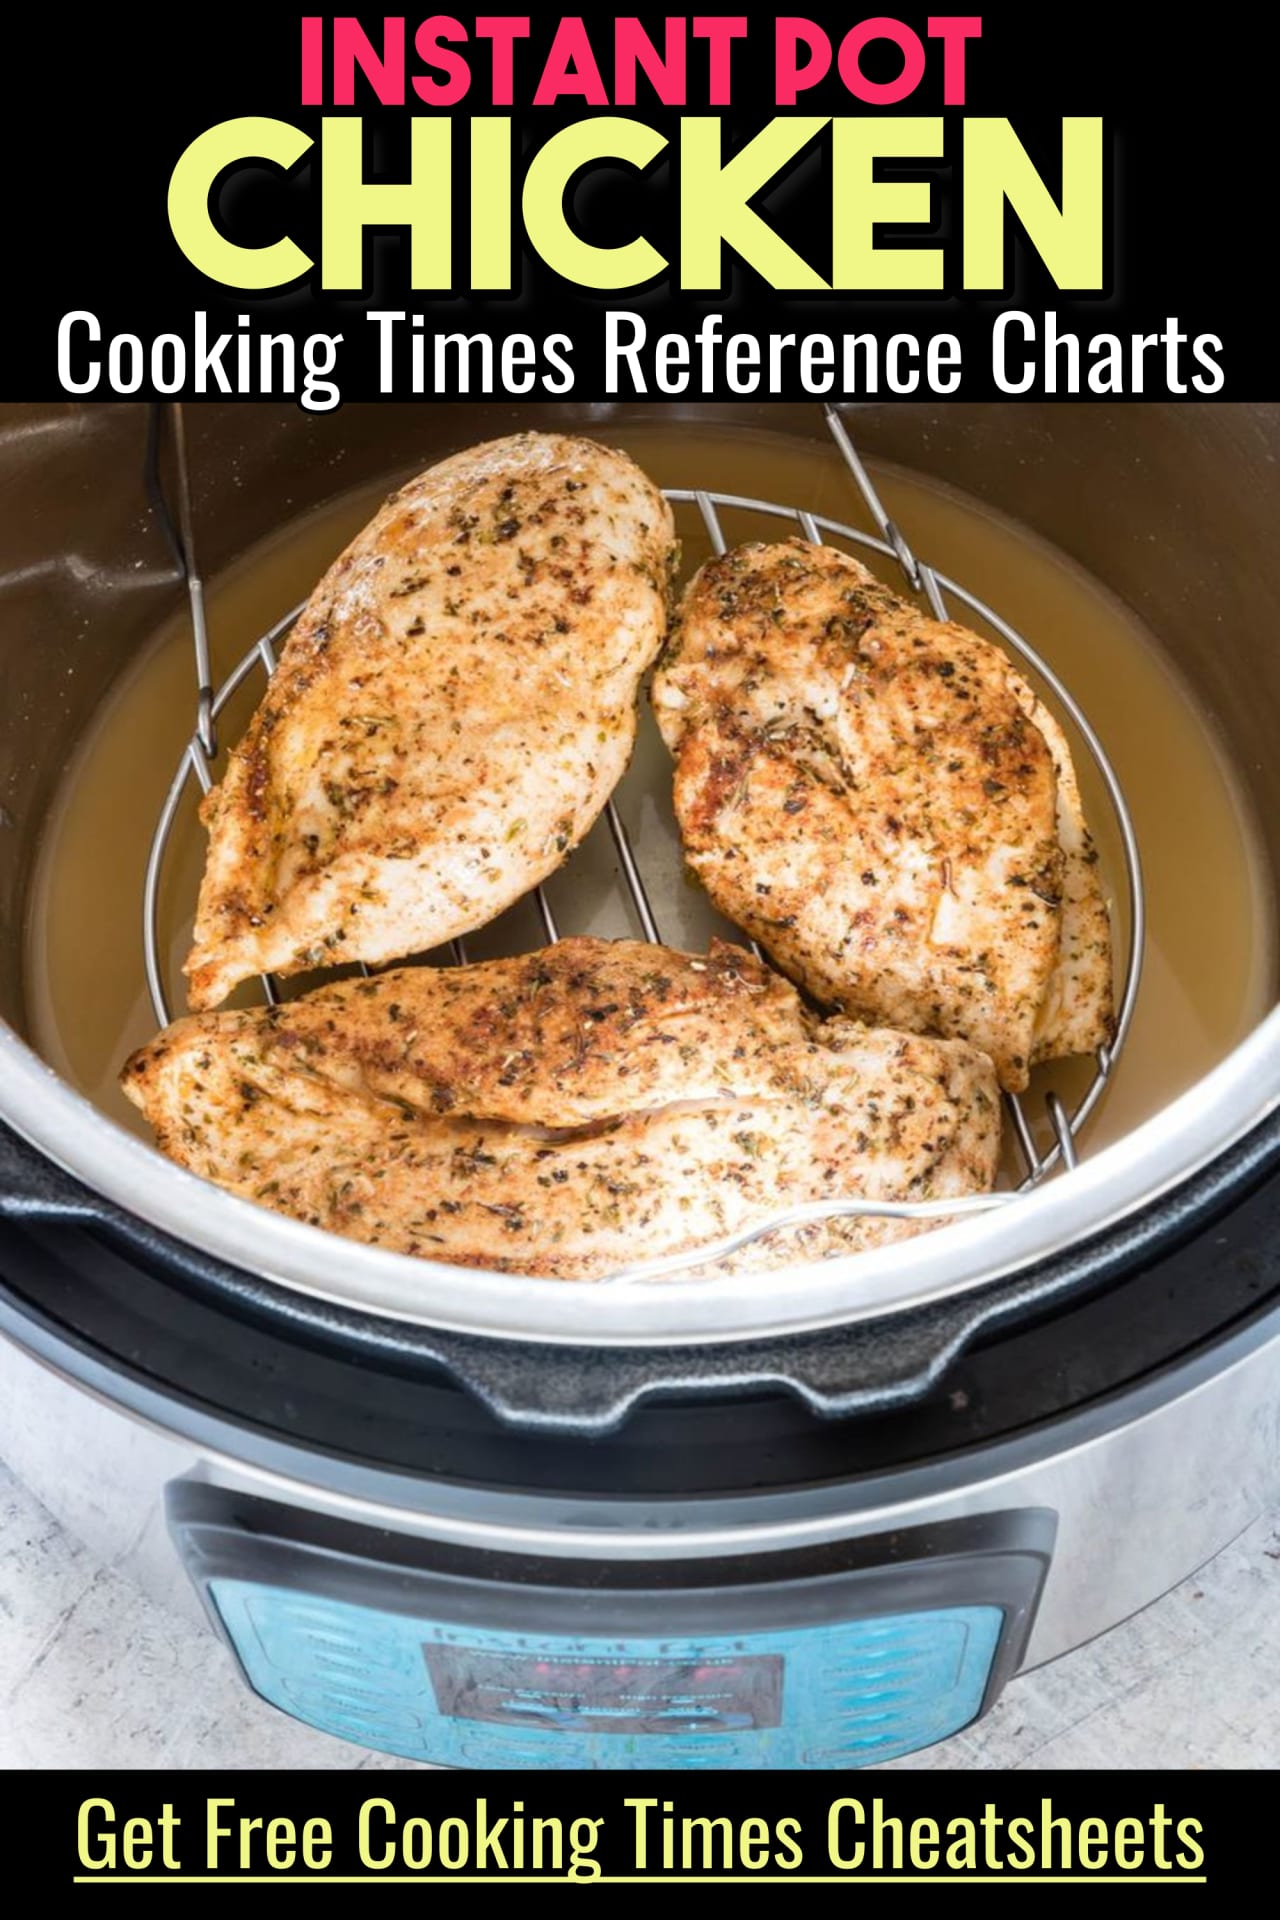 Instant Pot Chicken Cooking Times Charts, cheat sheets and printable pdf Instant Pot cooking times reference chart for all meats and vegetables